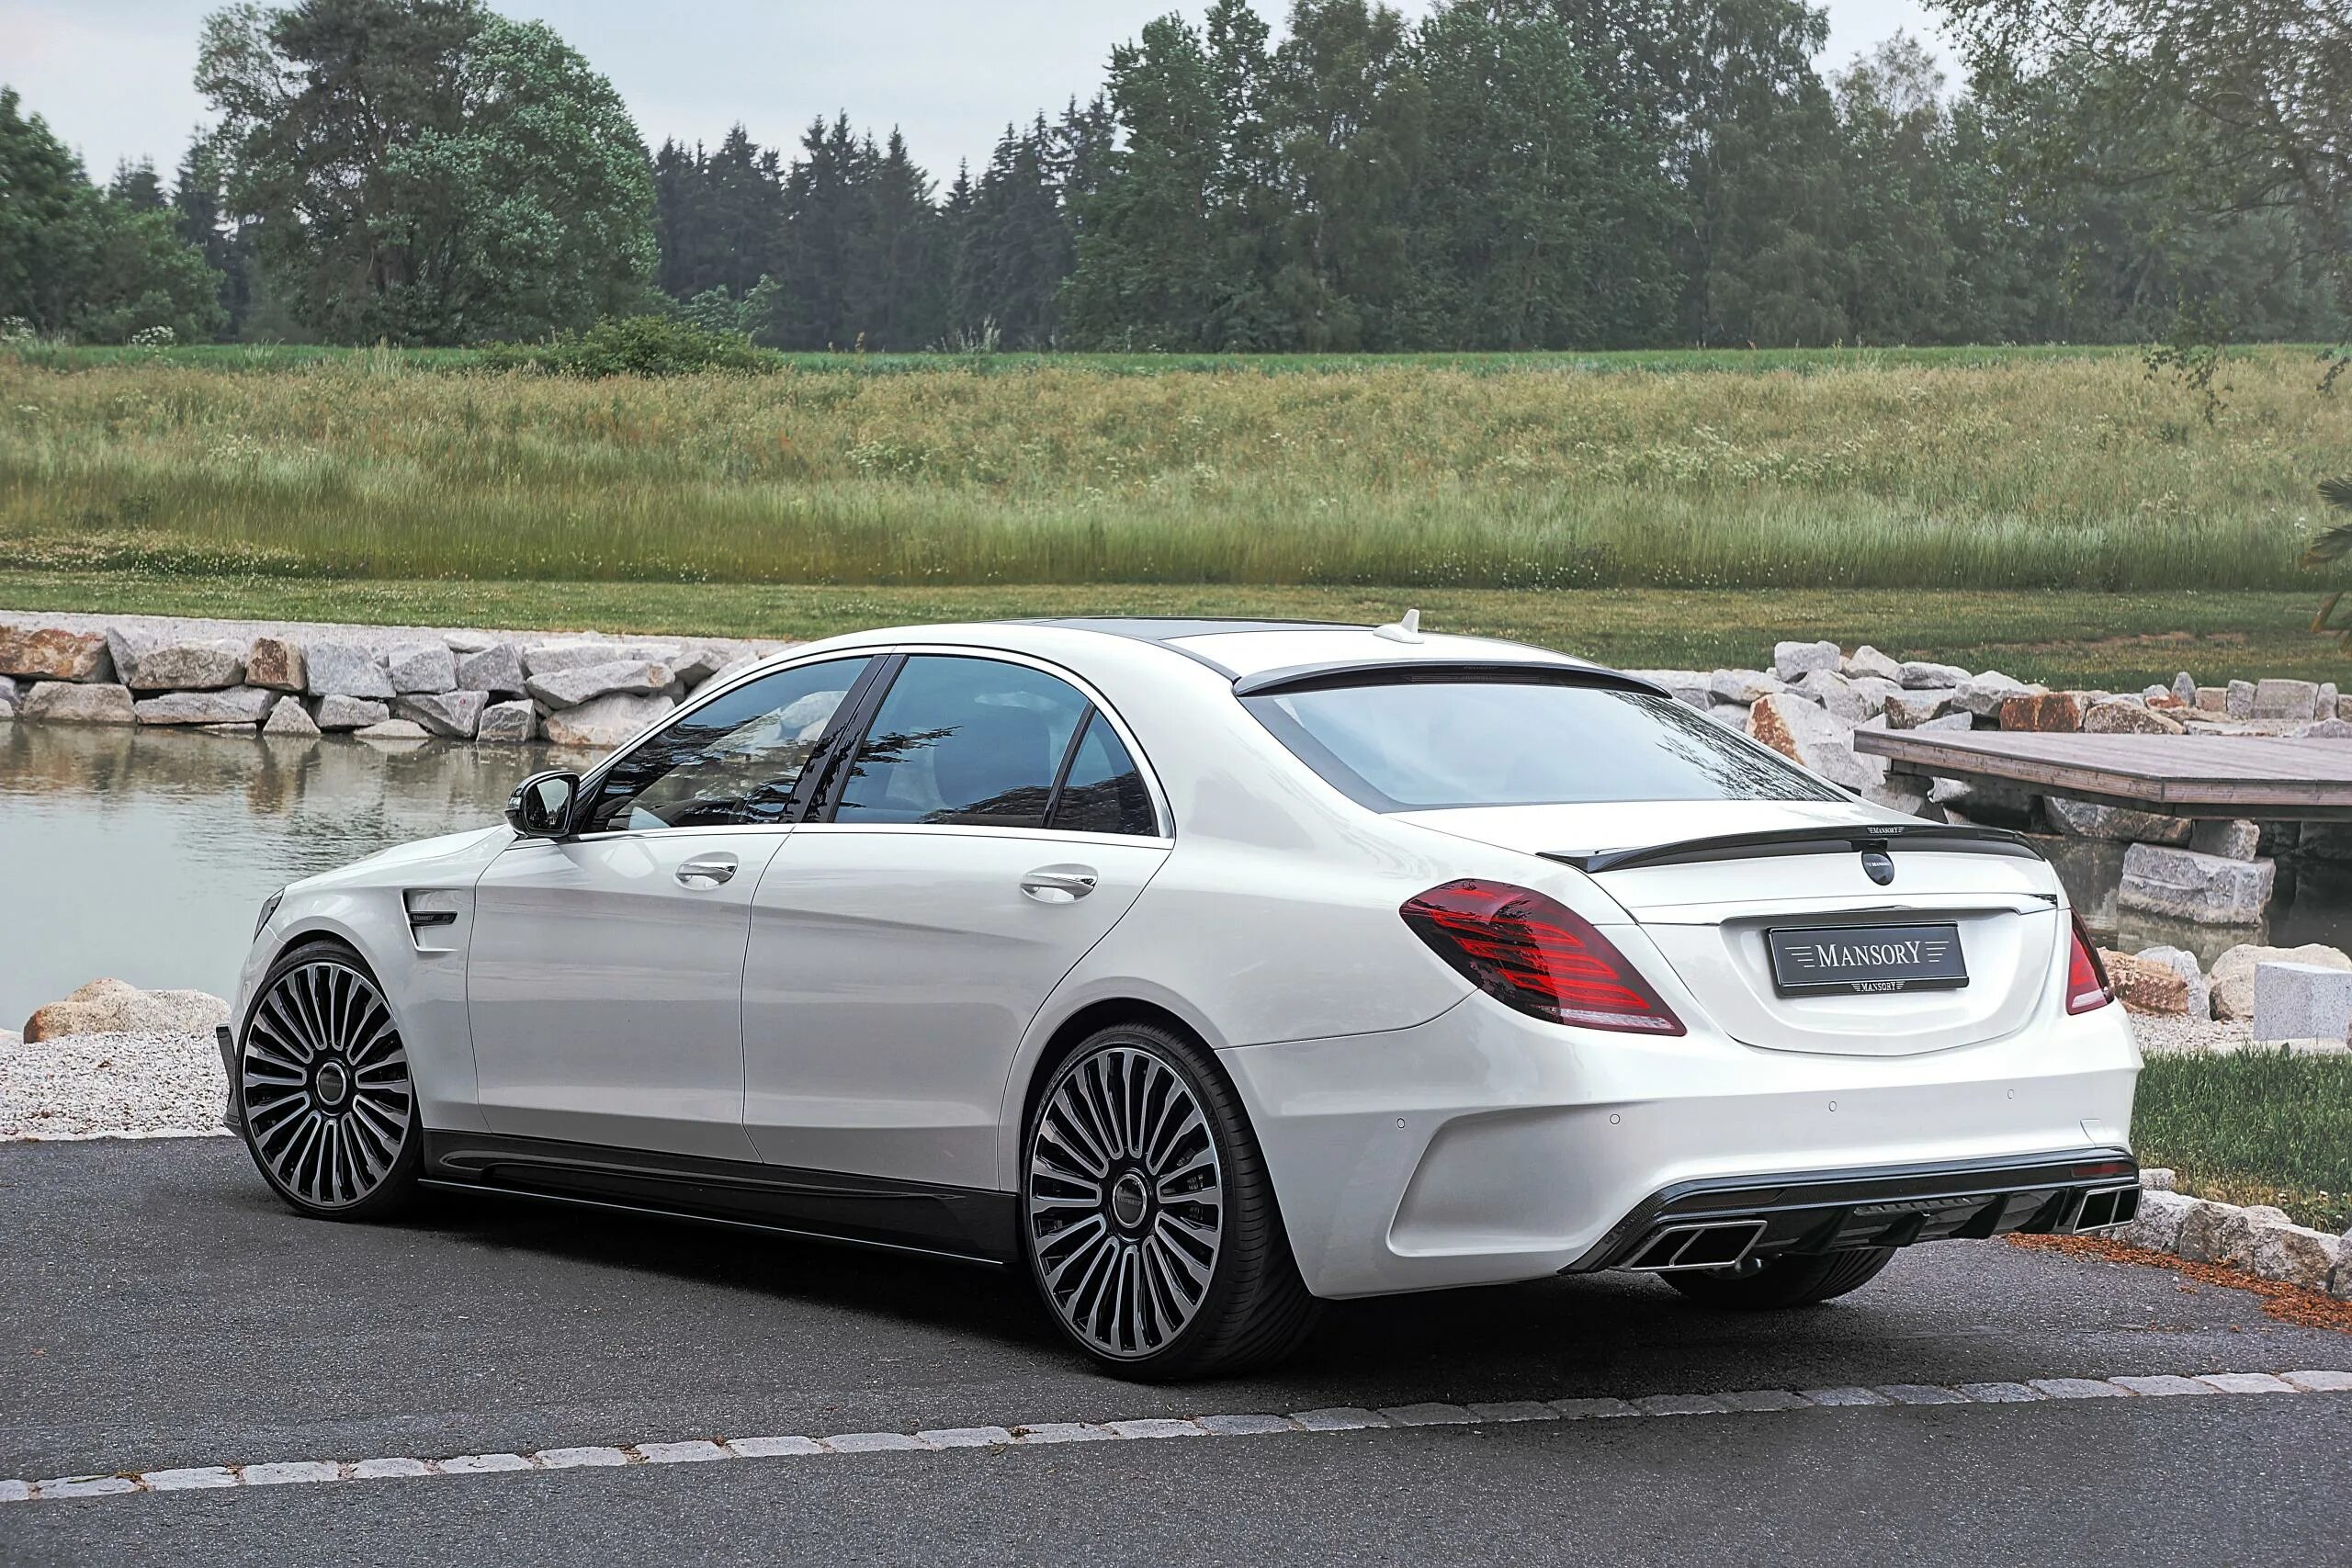 Mercedes s class w223 Mansory. Мерседес 222 Mansory. Mercedes Benz s63 w223. S63 w222 Mansory.